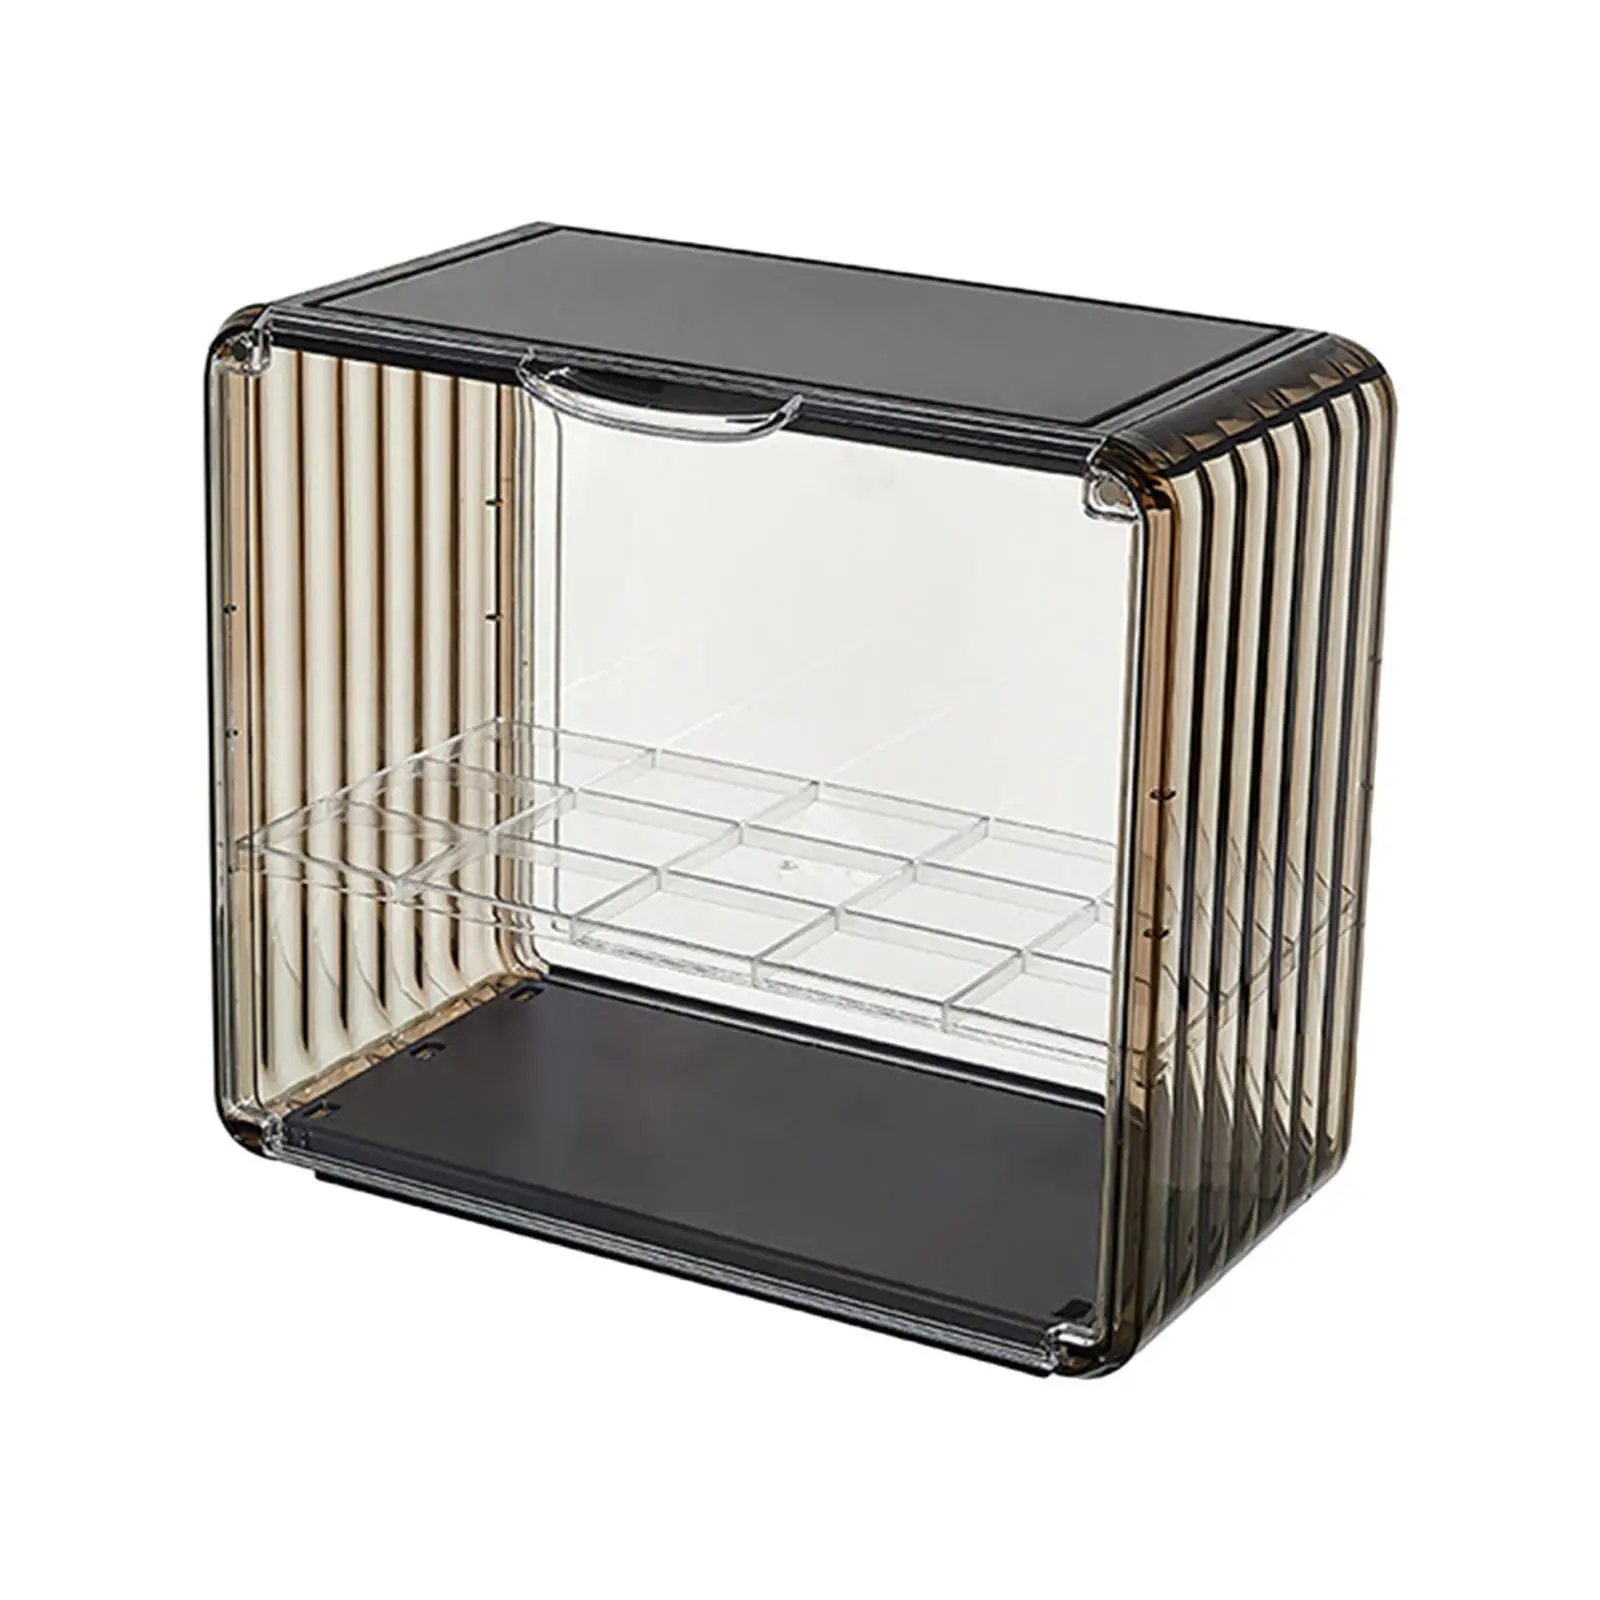 Acrylic Clear Display Case Multi Layer Transparent Assemble Storage Showcase